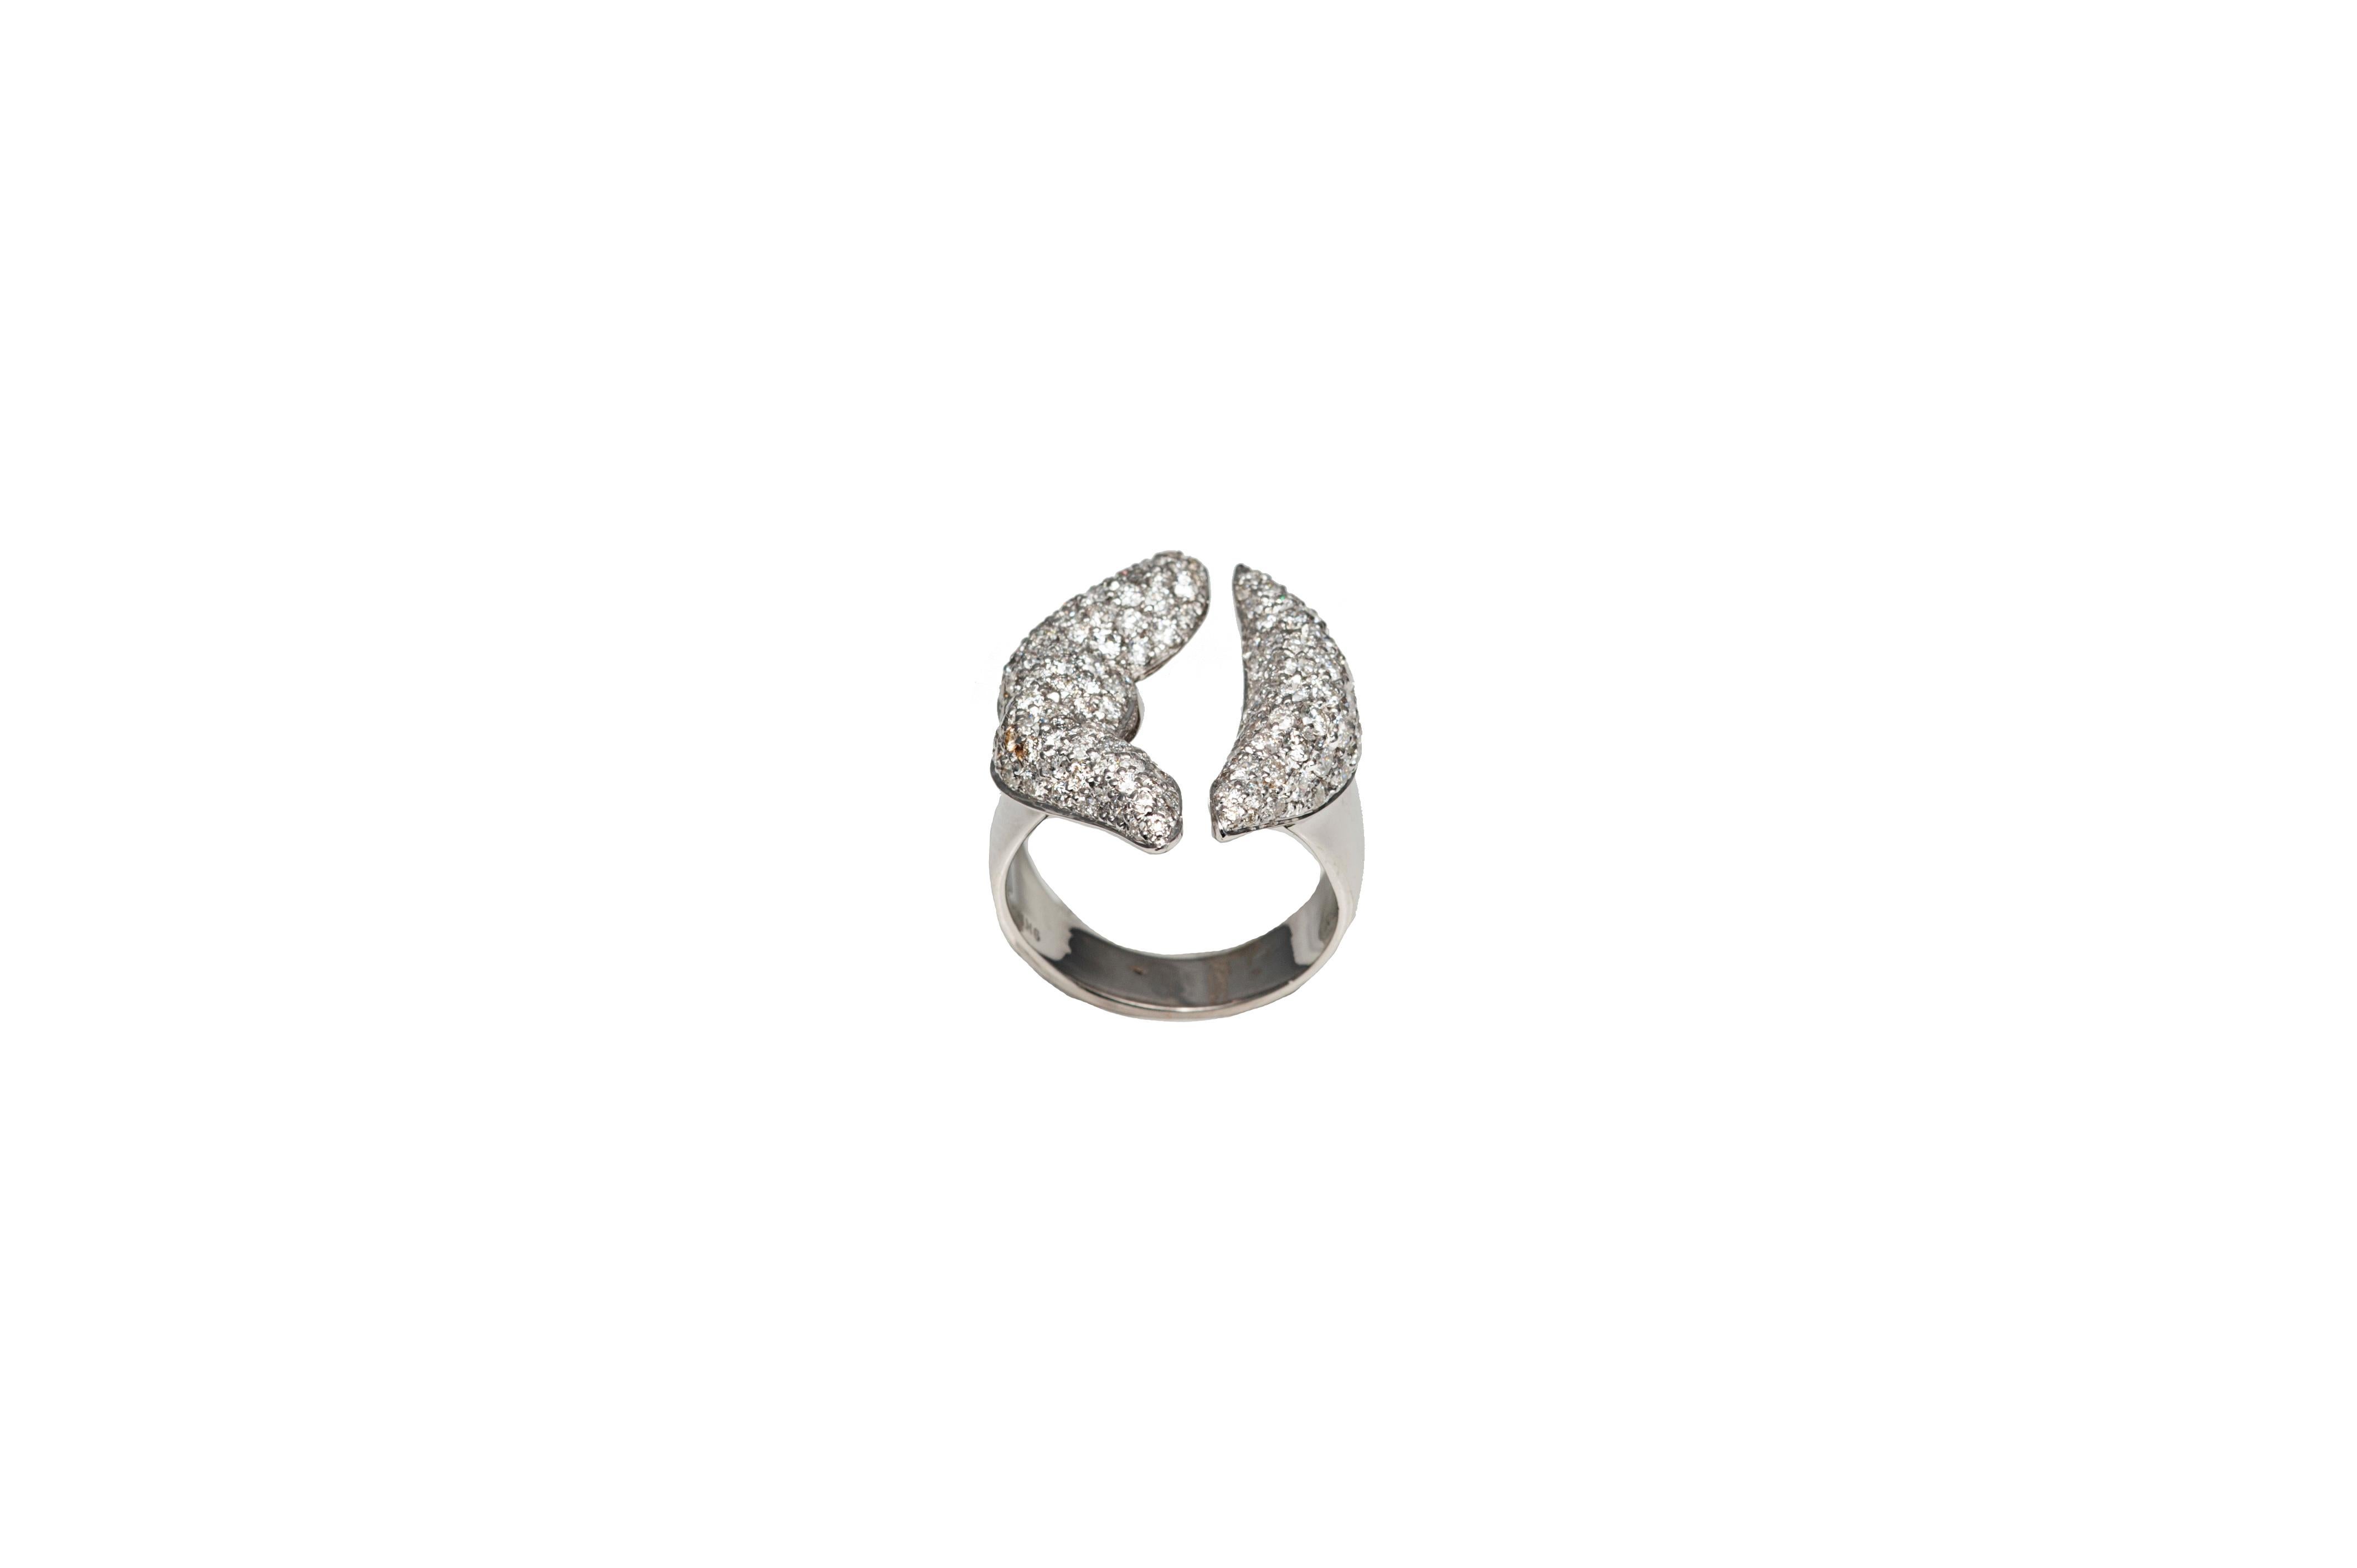 White gold lips ring with pavè diamonds.

Composition: 
Gold 10,25 gr (9K)
144 diamonds 2,20 ct

Size is adjustable from 6 US to 6 1/2 US ( italian size from 12 to 13)
Other sizes on demand, working time approx 15 days.